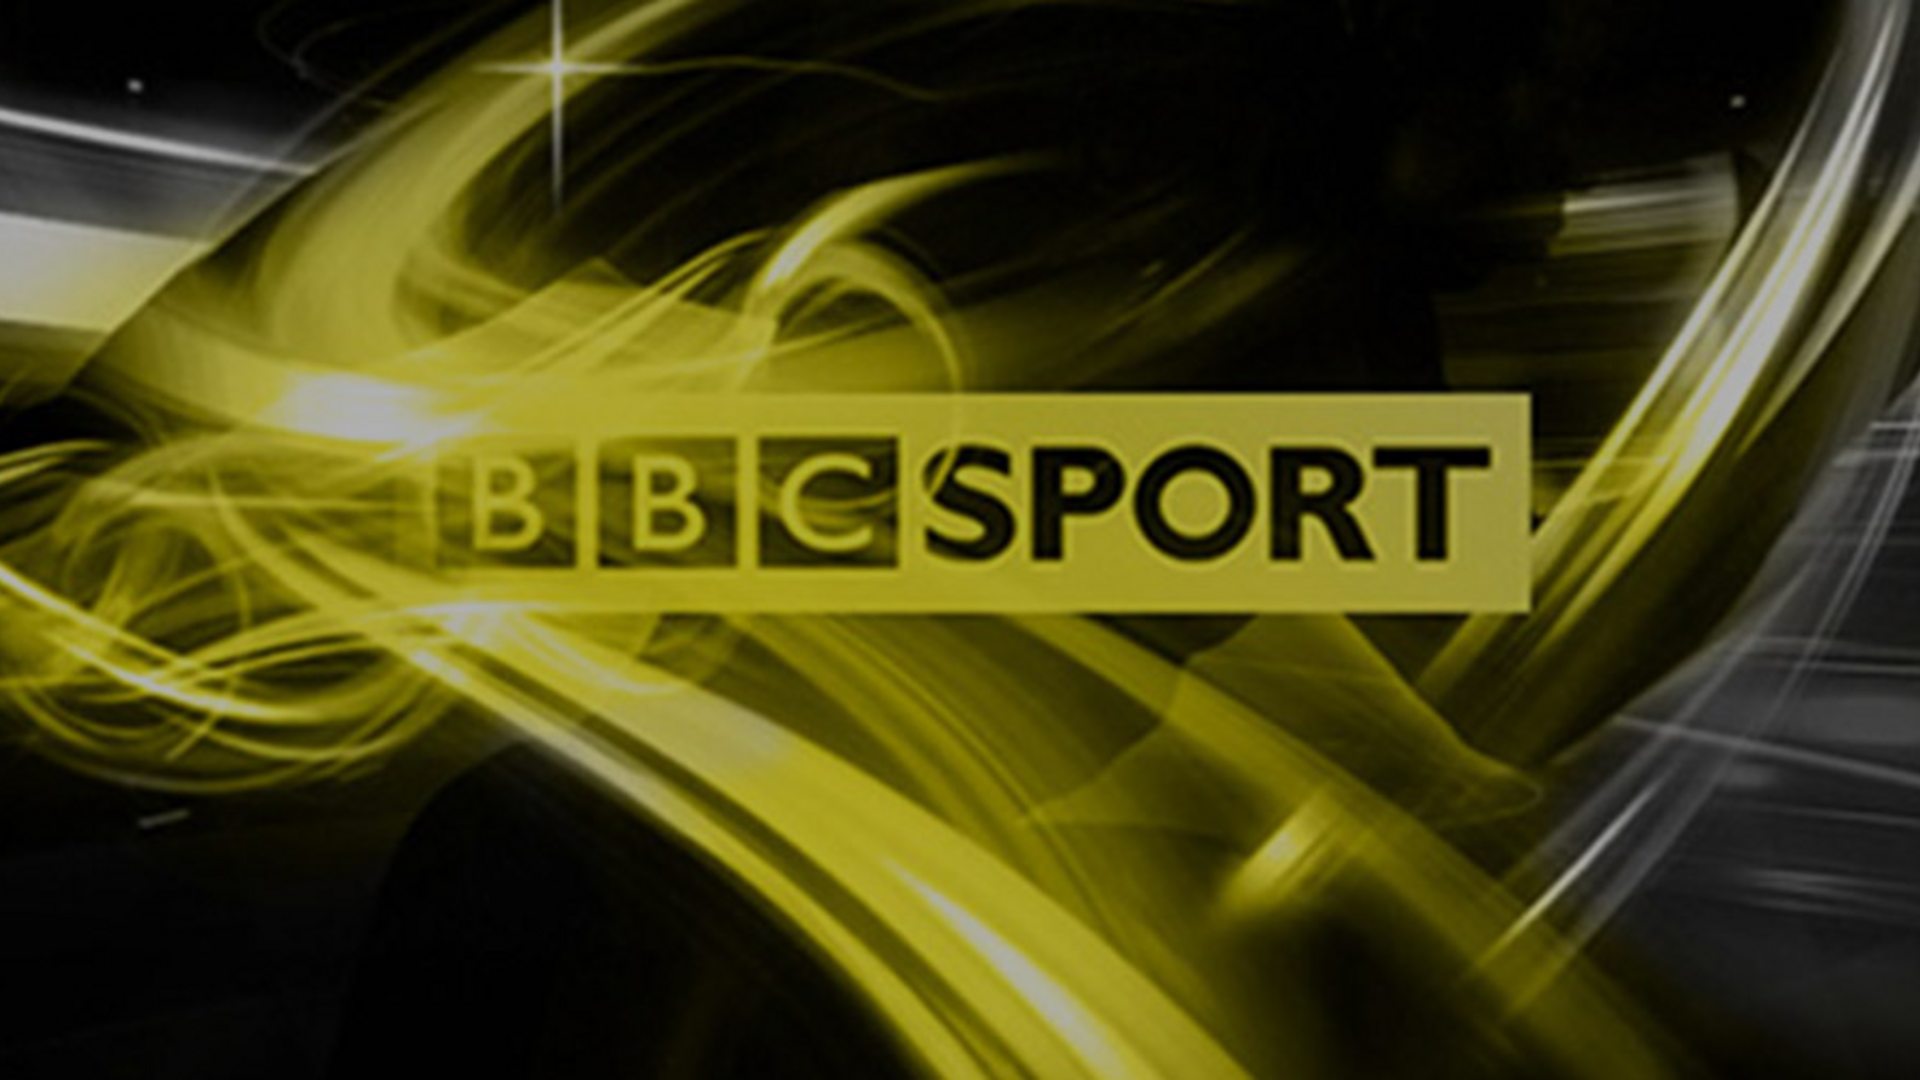 www.bbc.co.uk/sport is 20 - History of the BBC